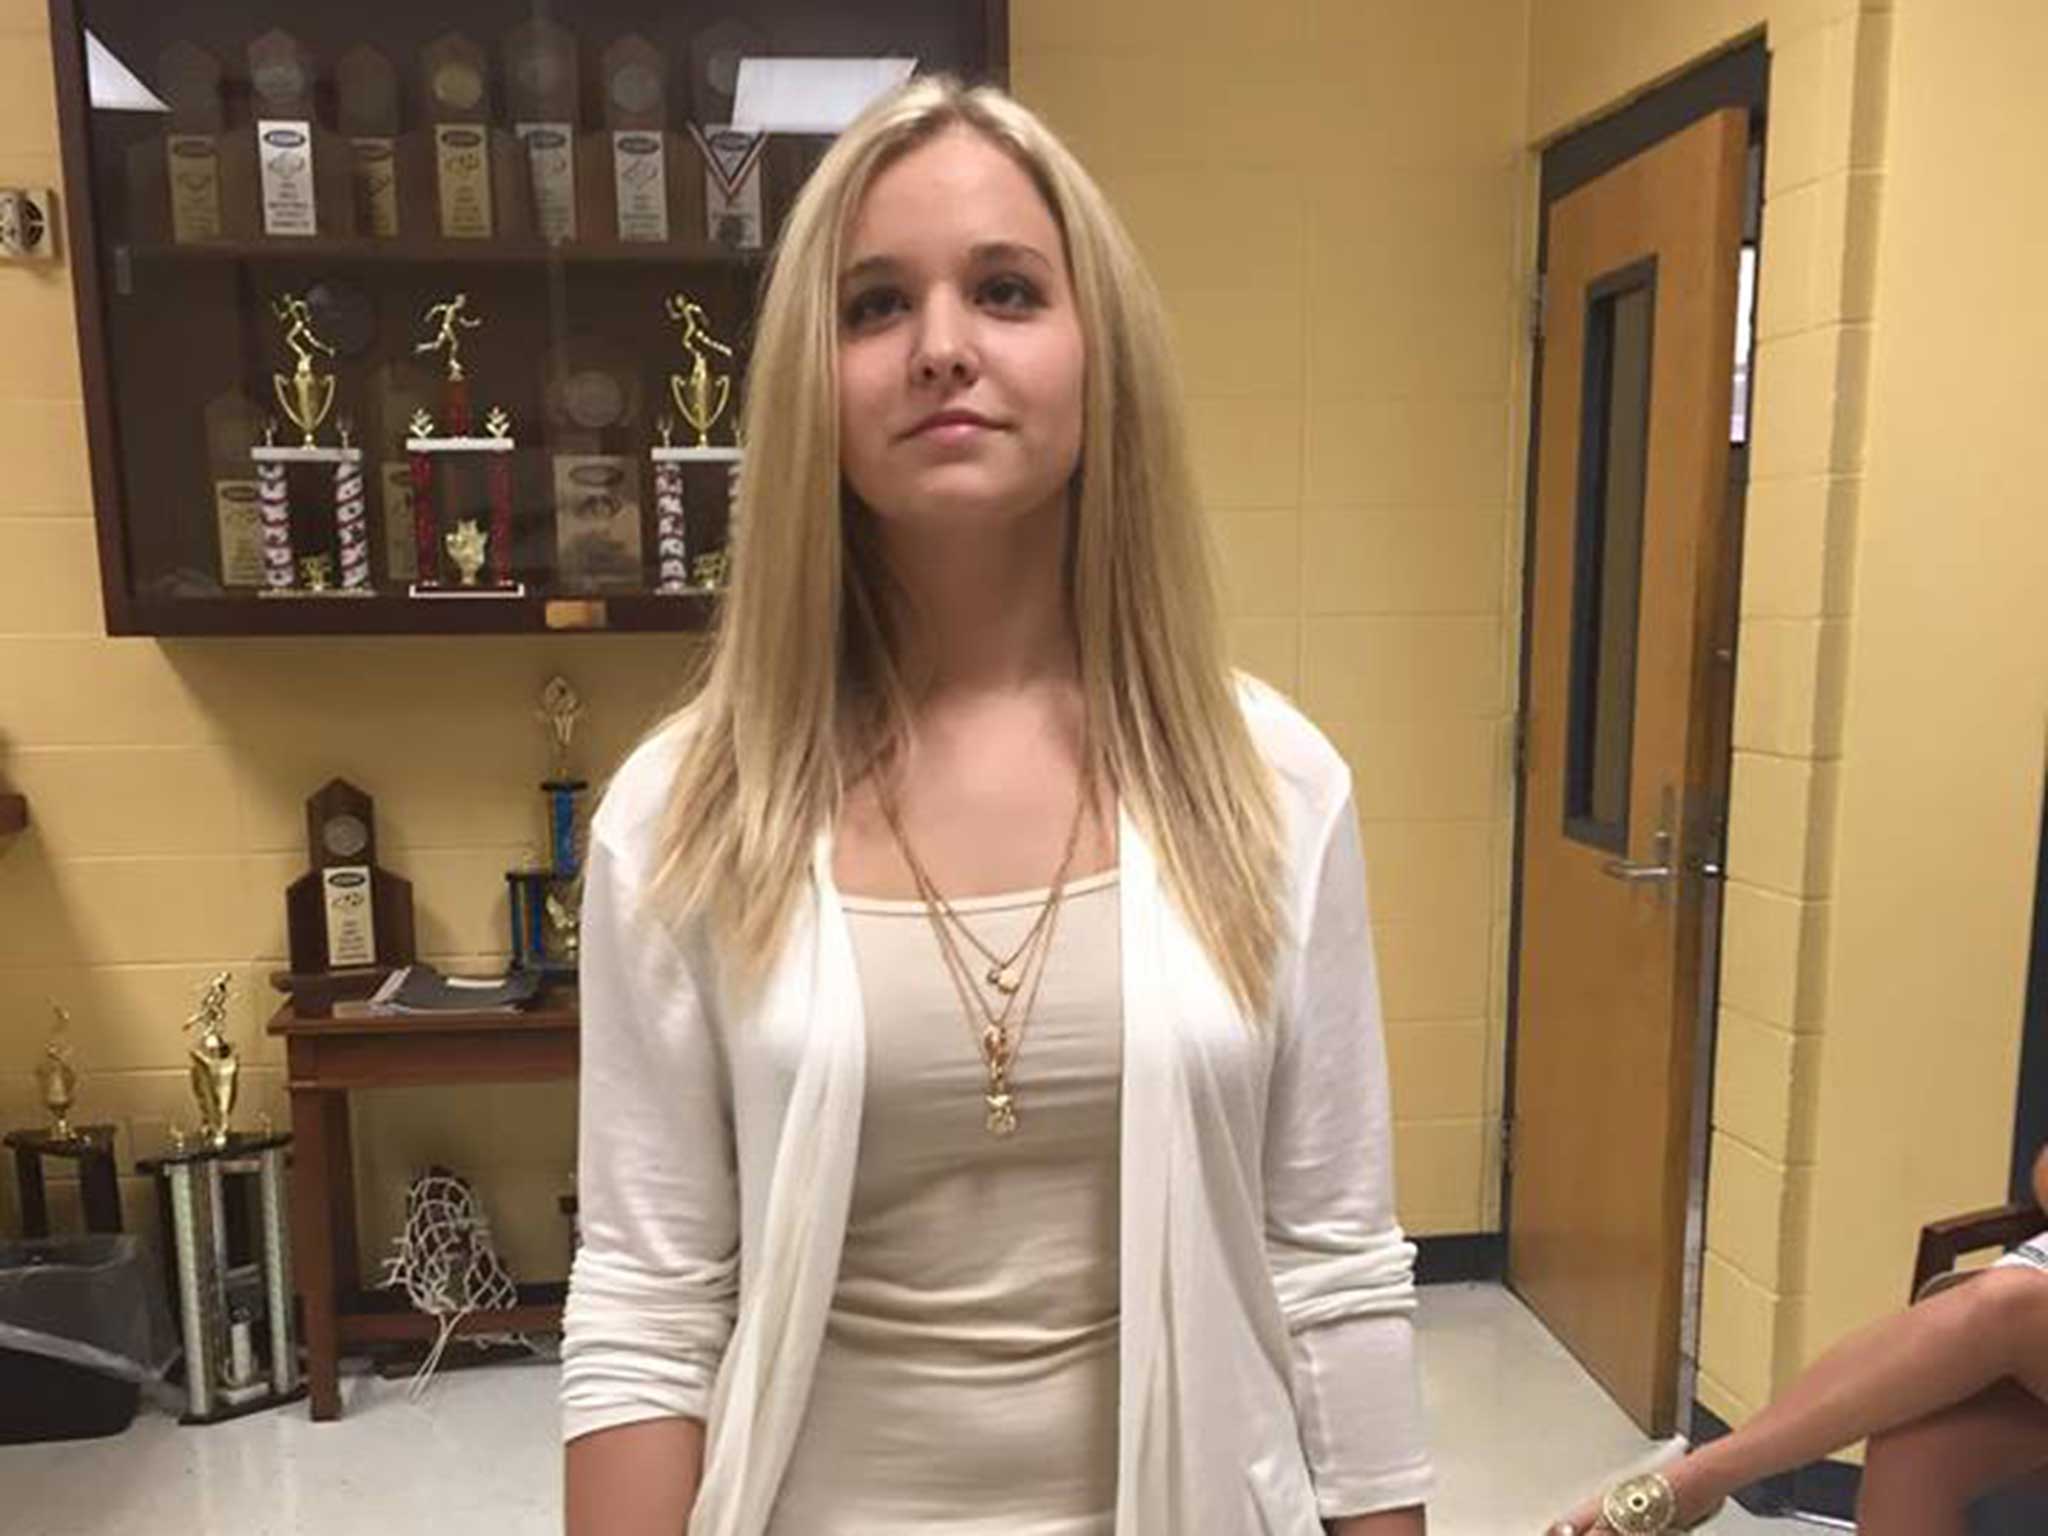 Teenage Girl Sent Home For Violating School Dress Code By Showing Her Collarbones The